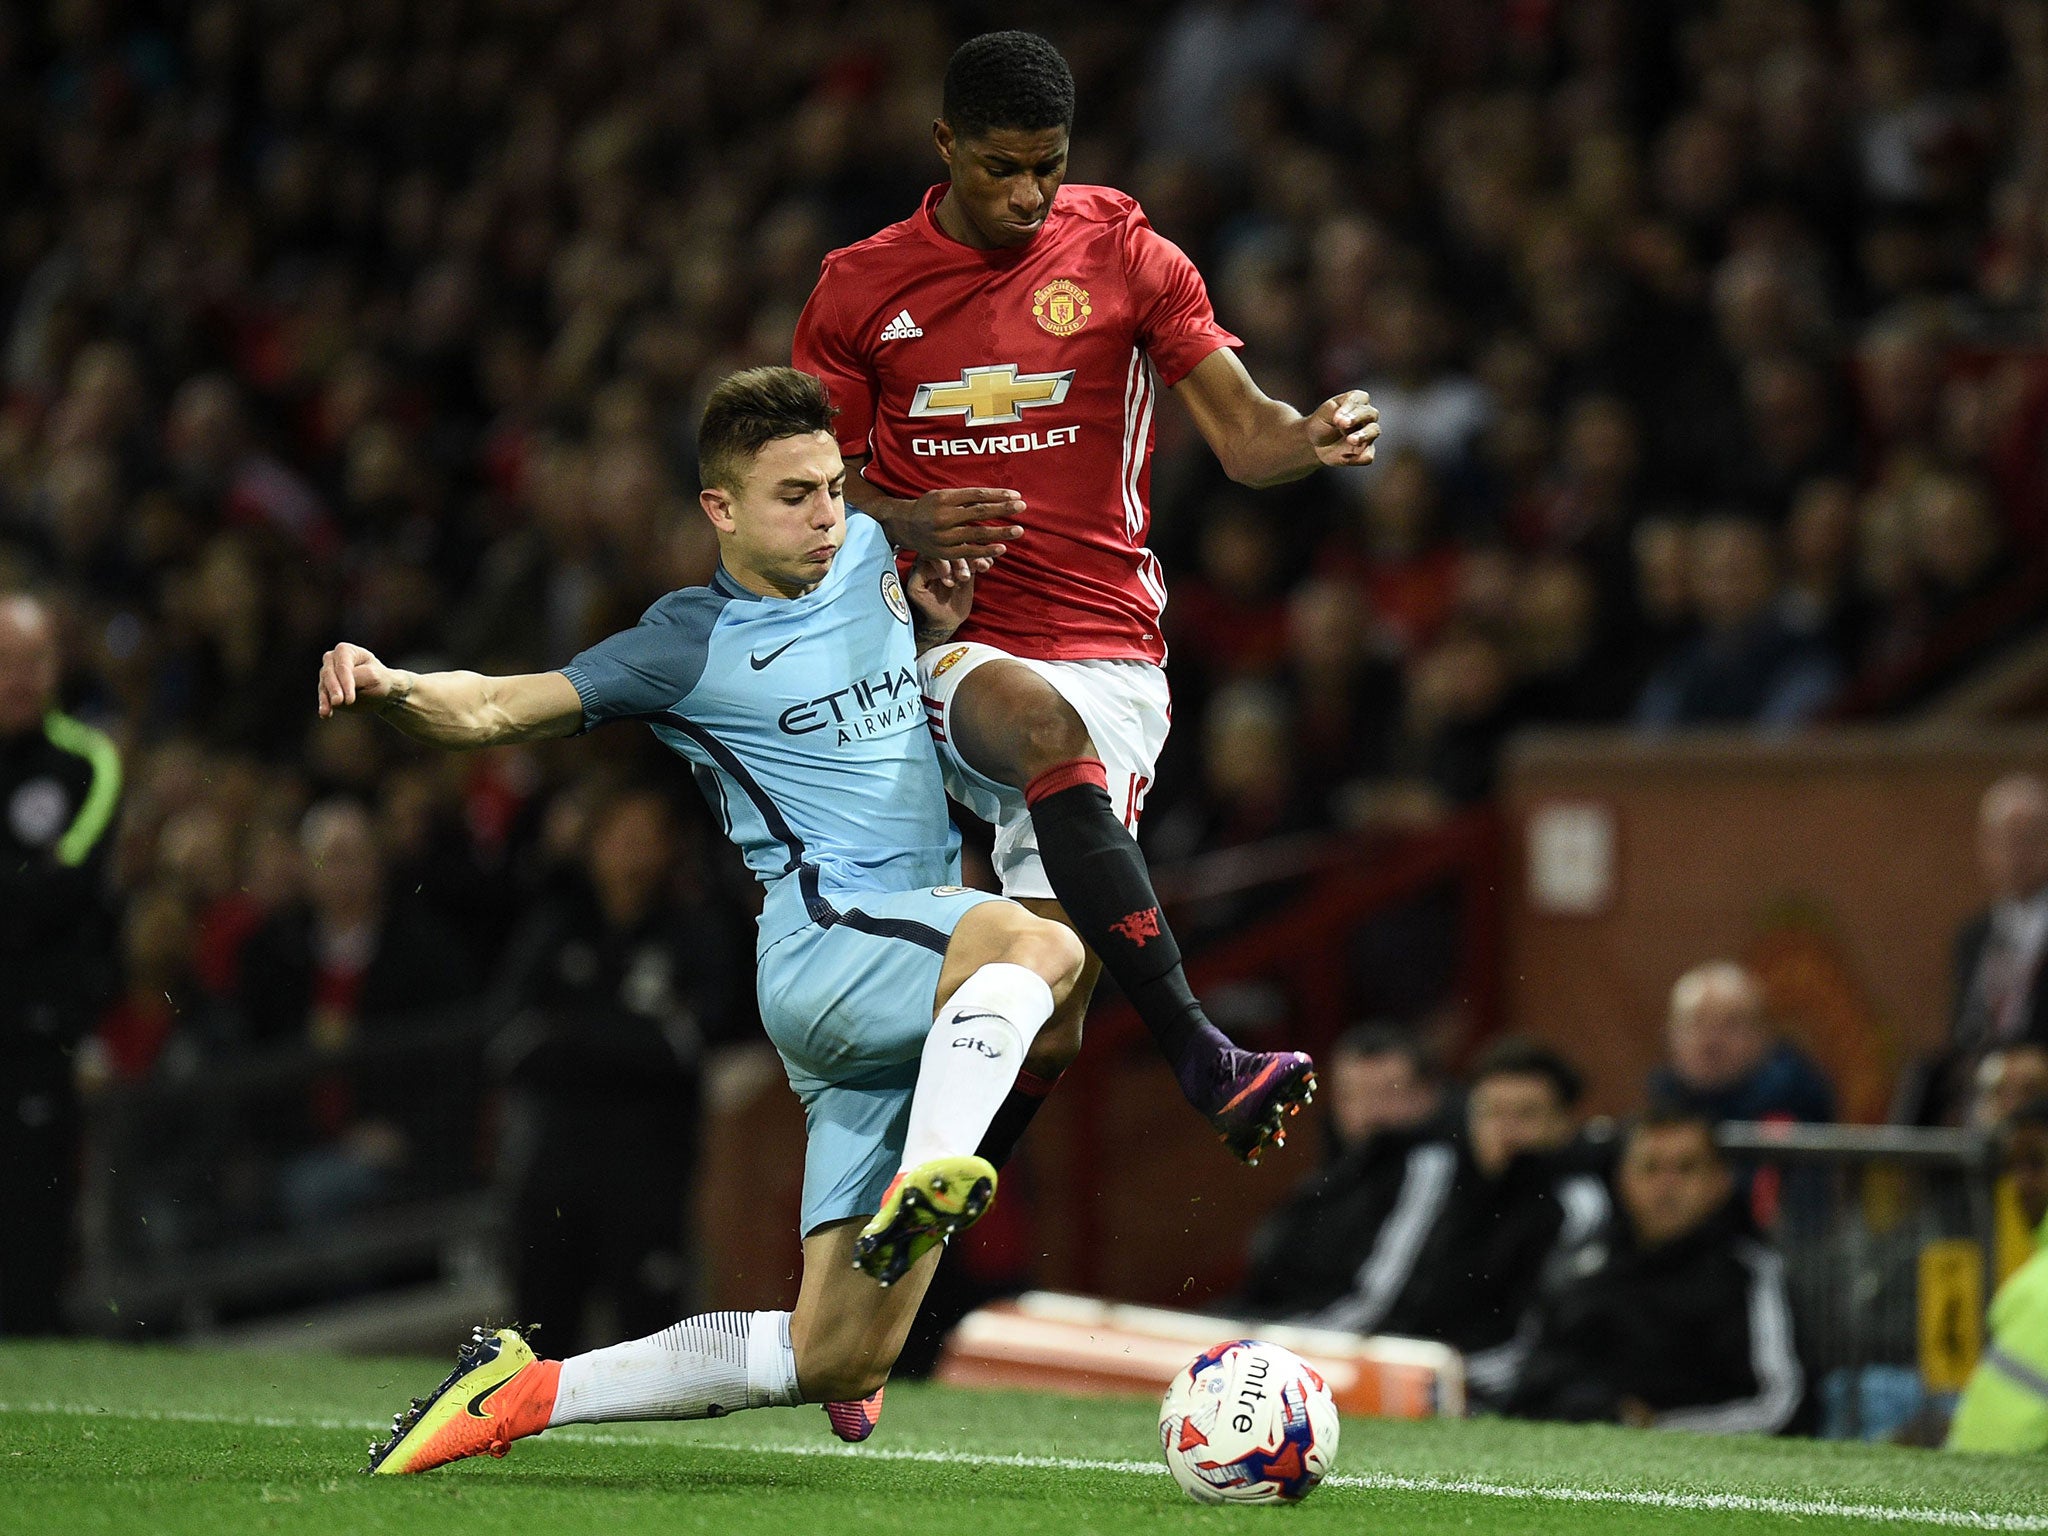 Maffeo clashes with Marcus Rashford during Wednesday's EFL Cup fixture